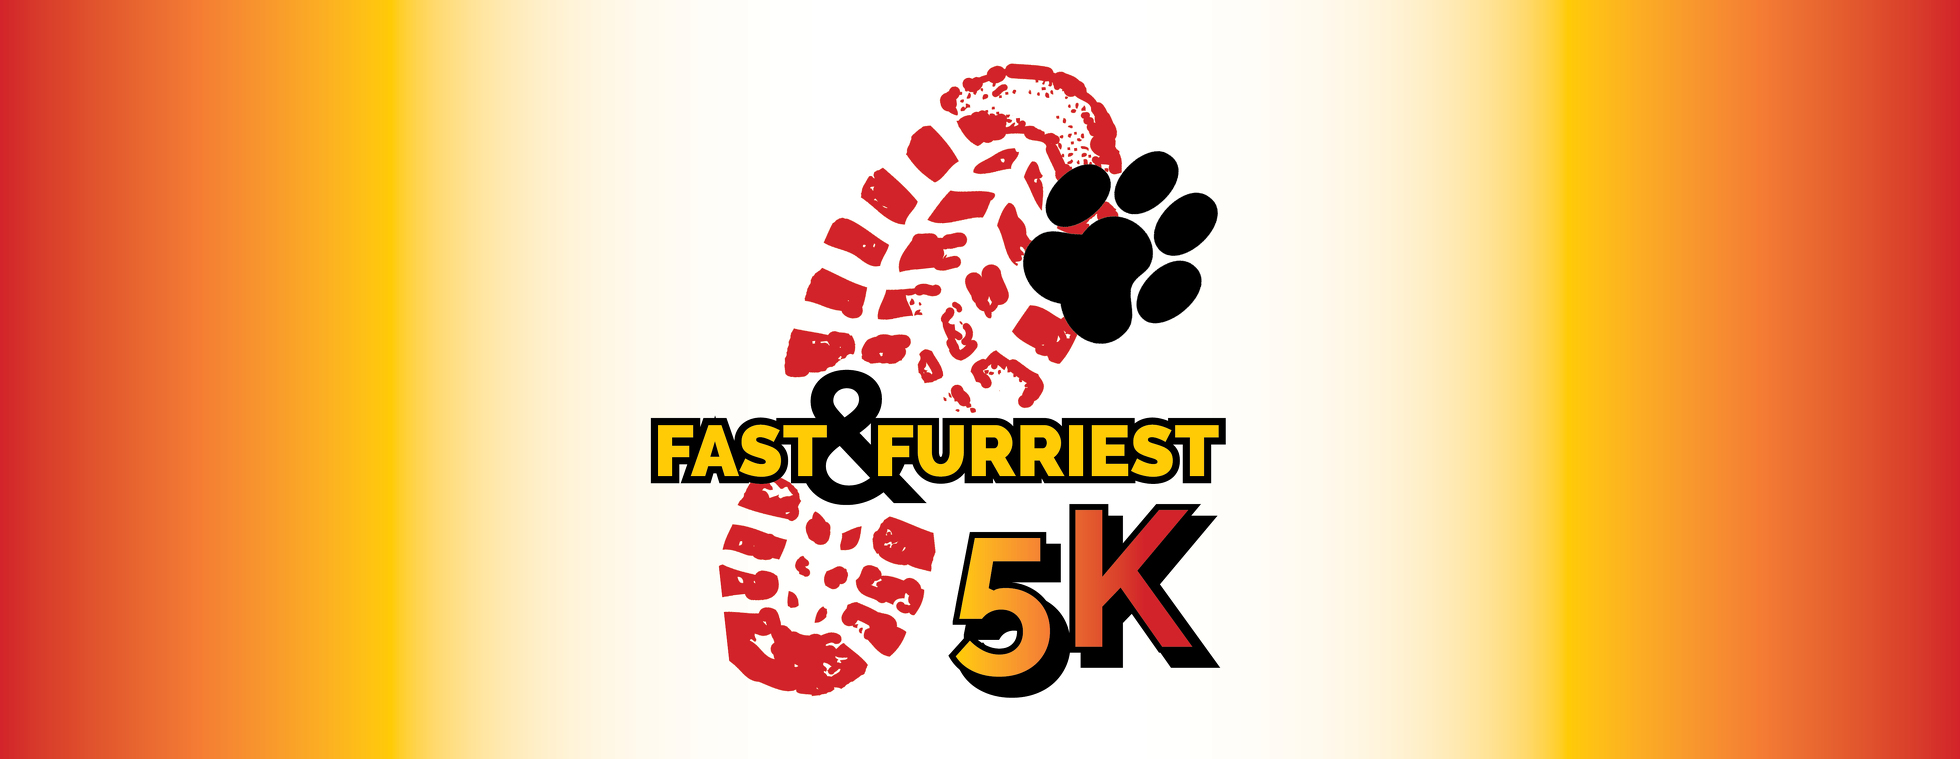 Independent Animal Rescue Fast and Furriest 5K